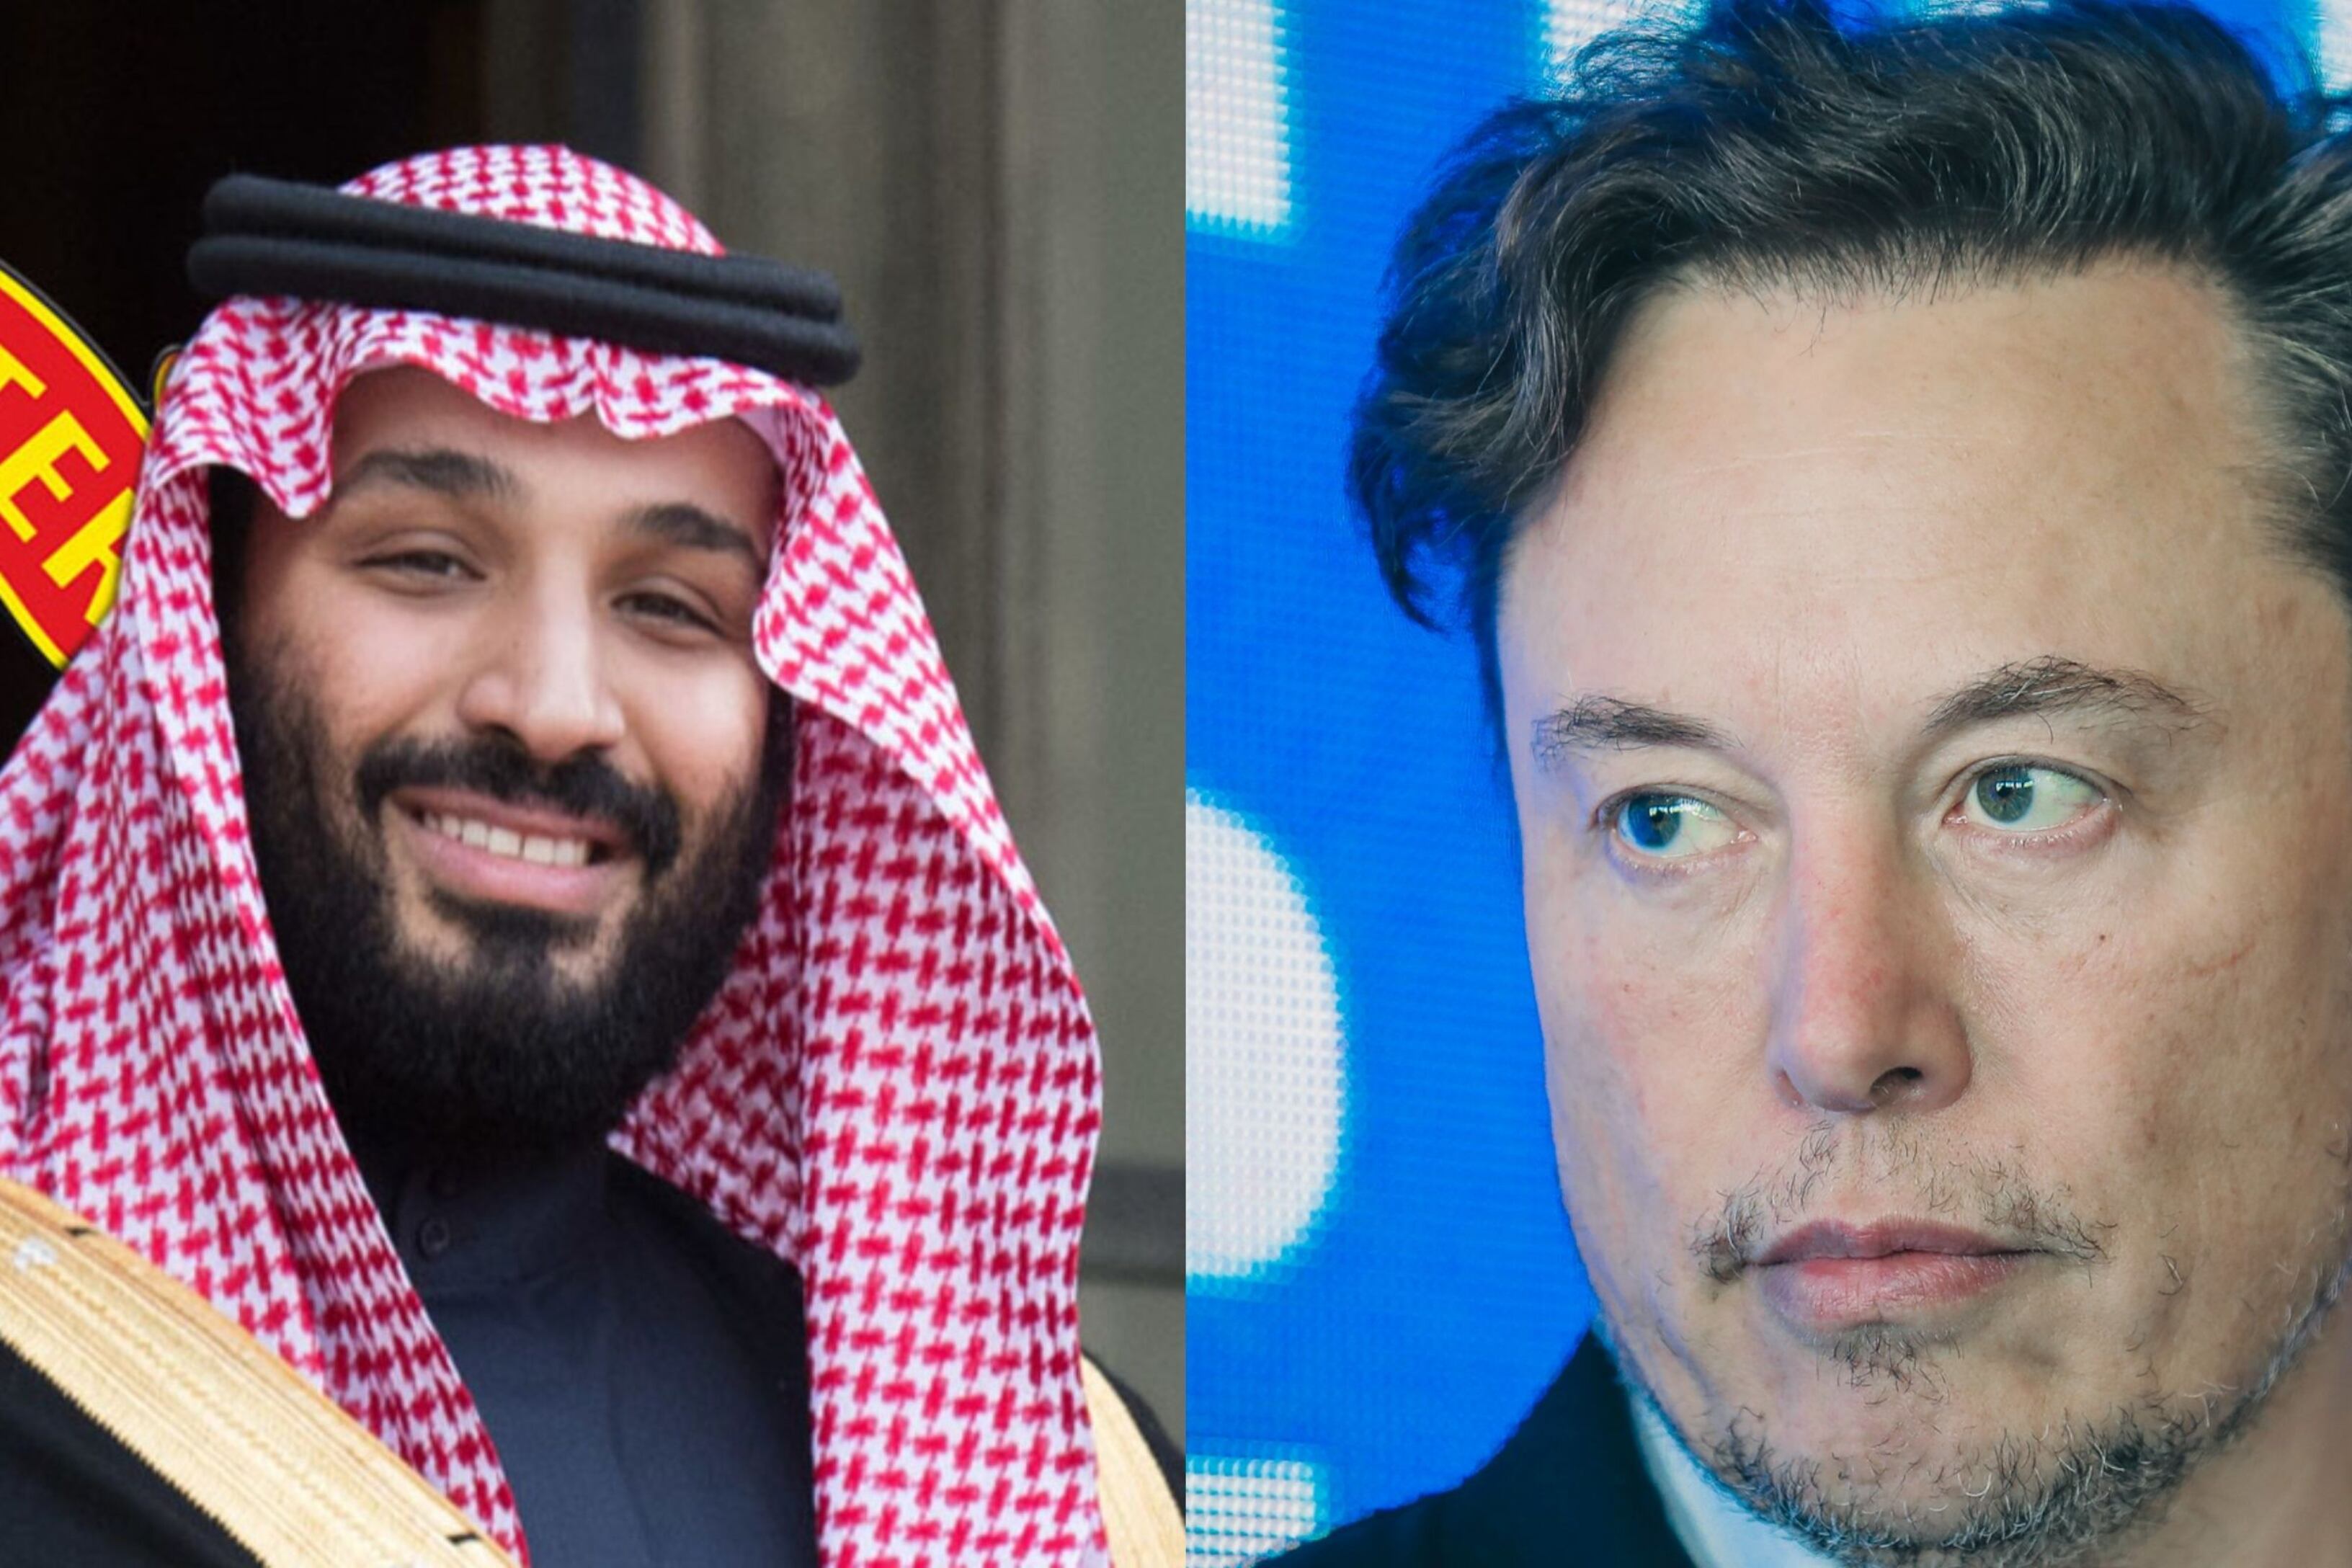 Not even Elon Musk dared so much, the sheik who puts up 5 billion dollars to buy Manchester United